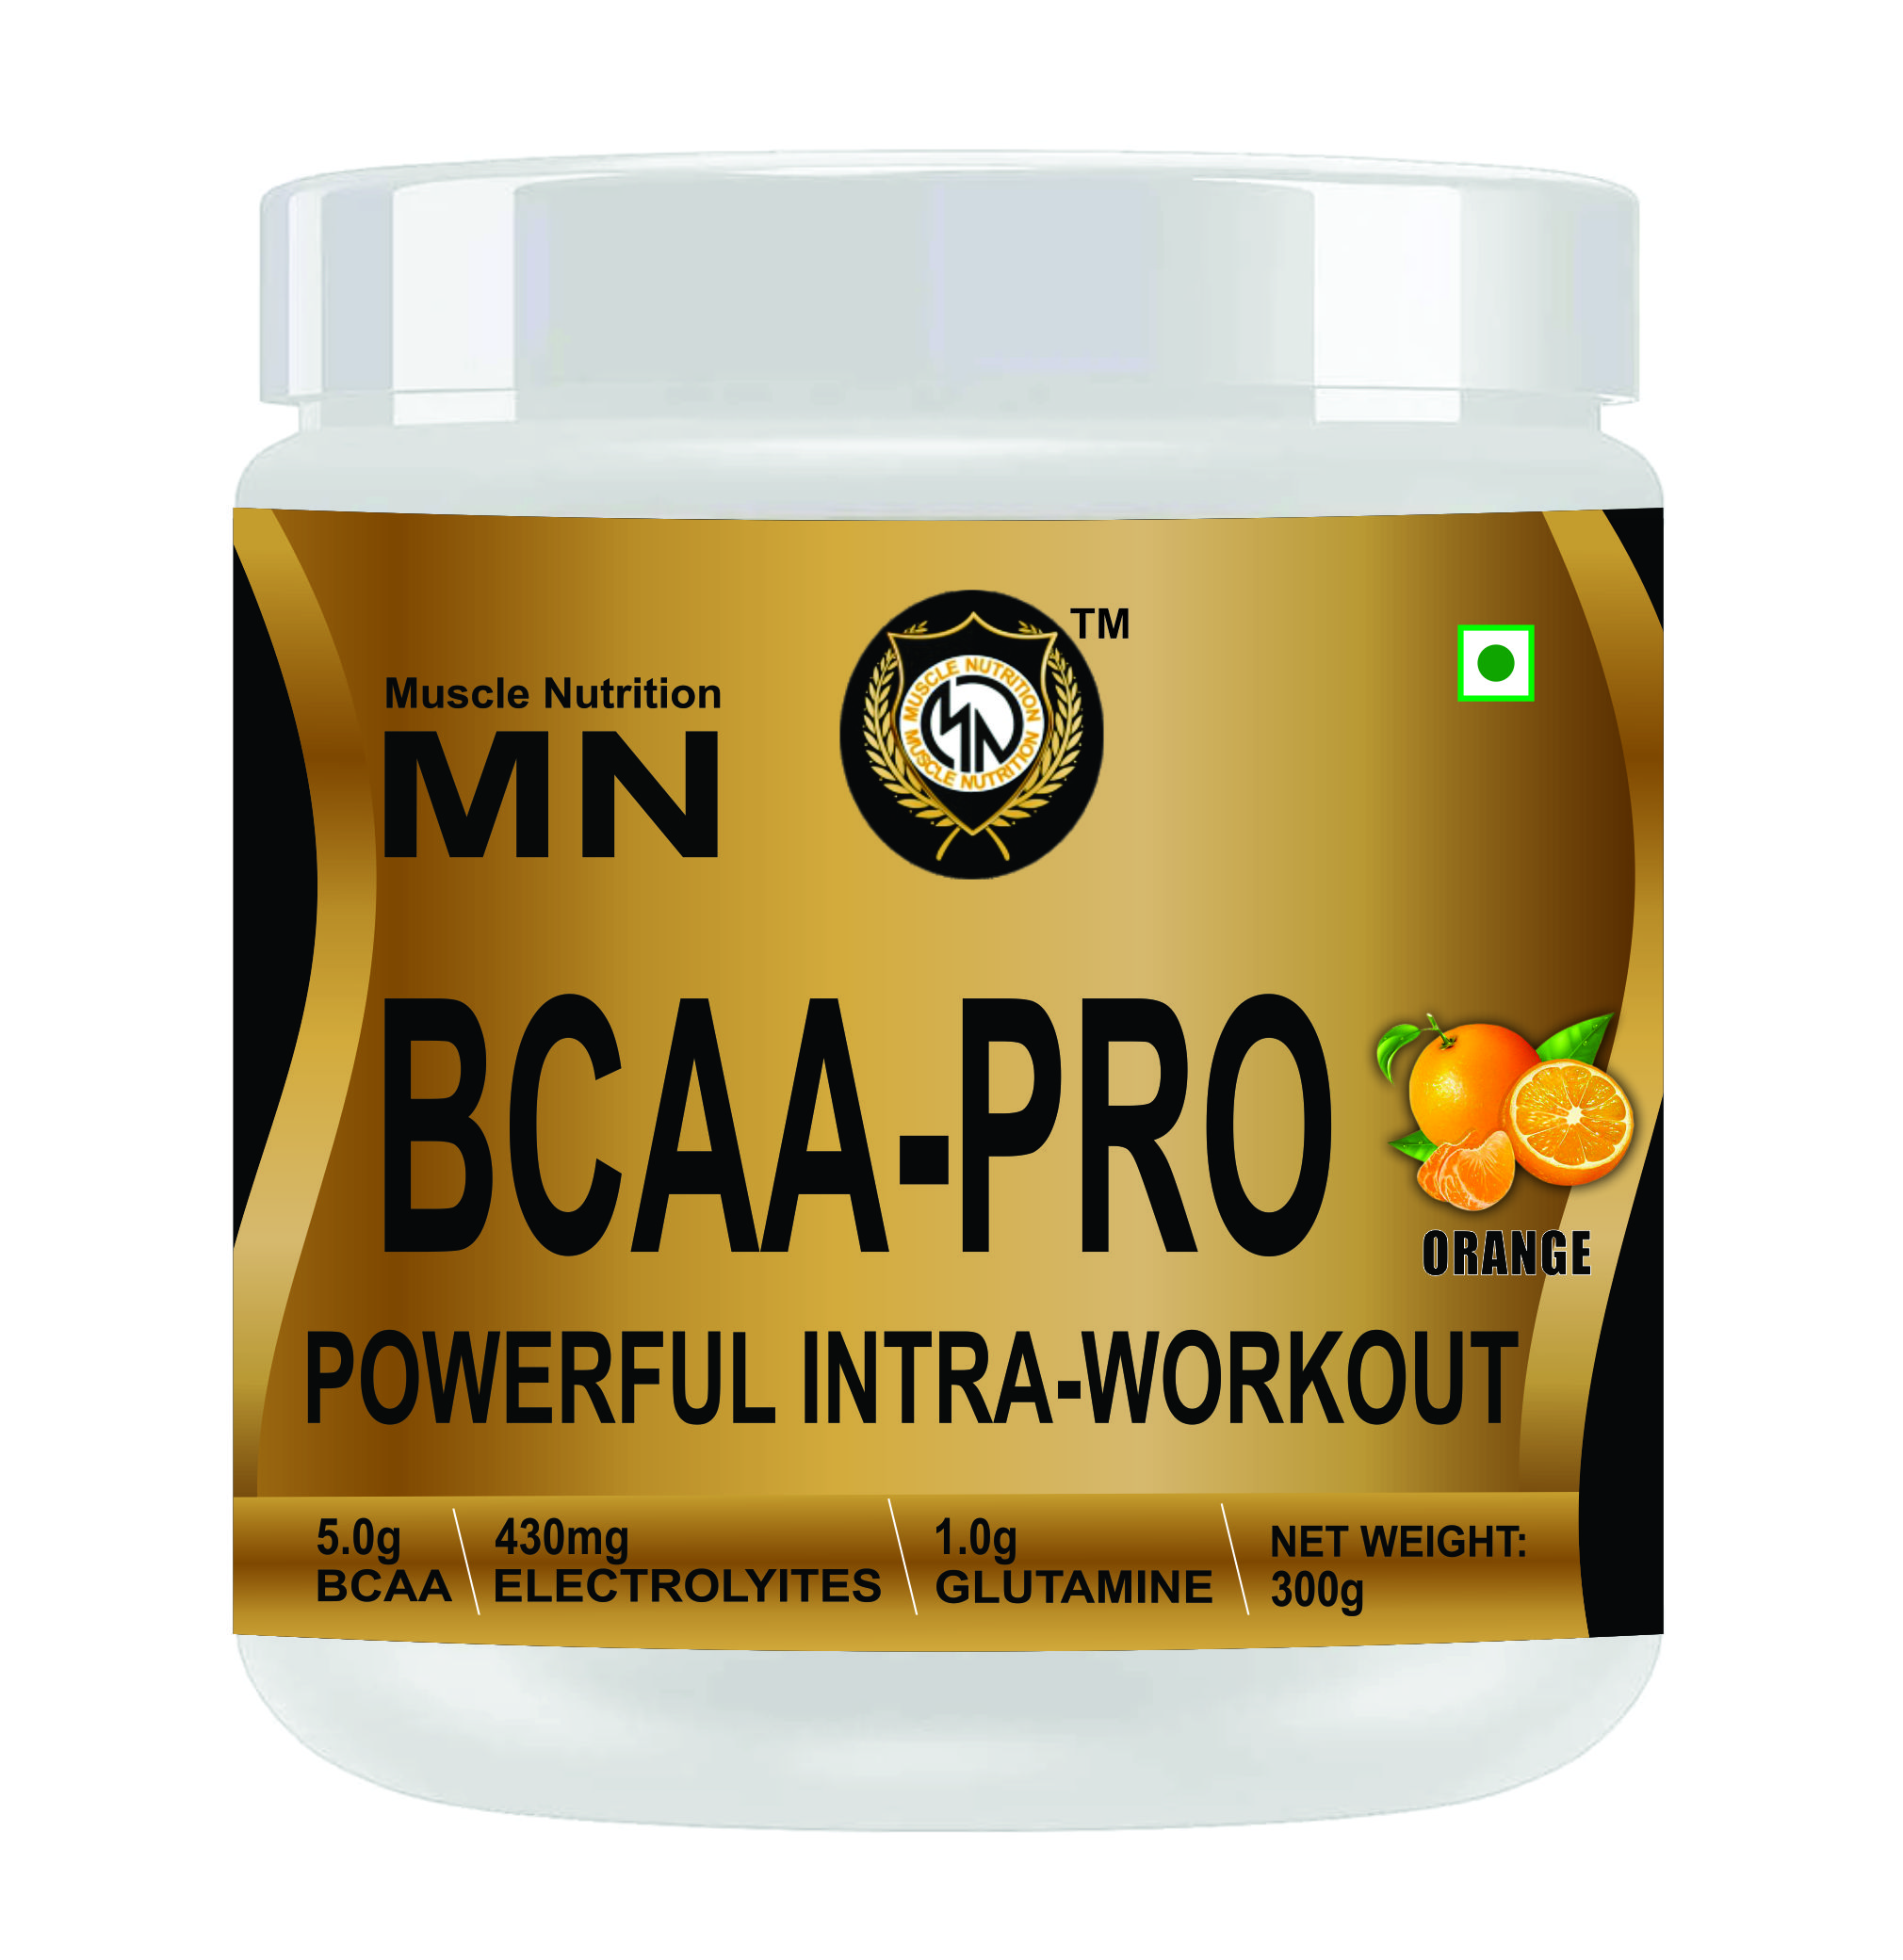 Buy Muscle Nutrition BCAA-PRO (300g), Orange Supplements online at Best Price in India